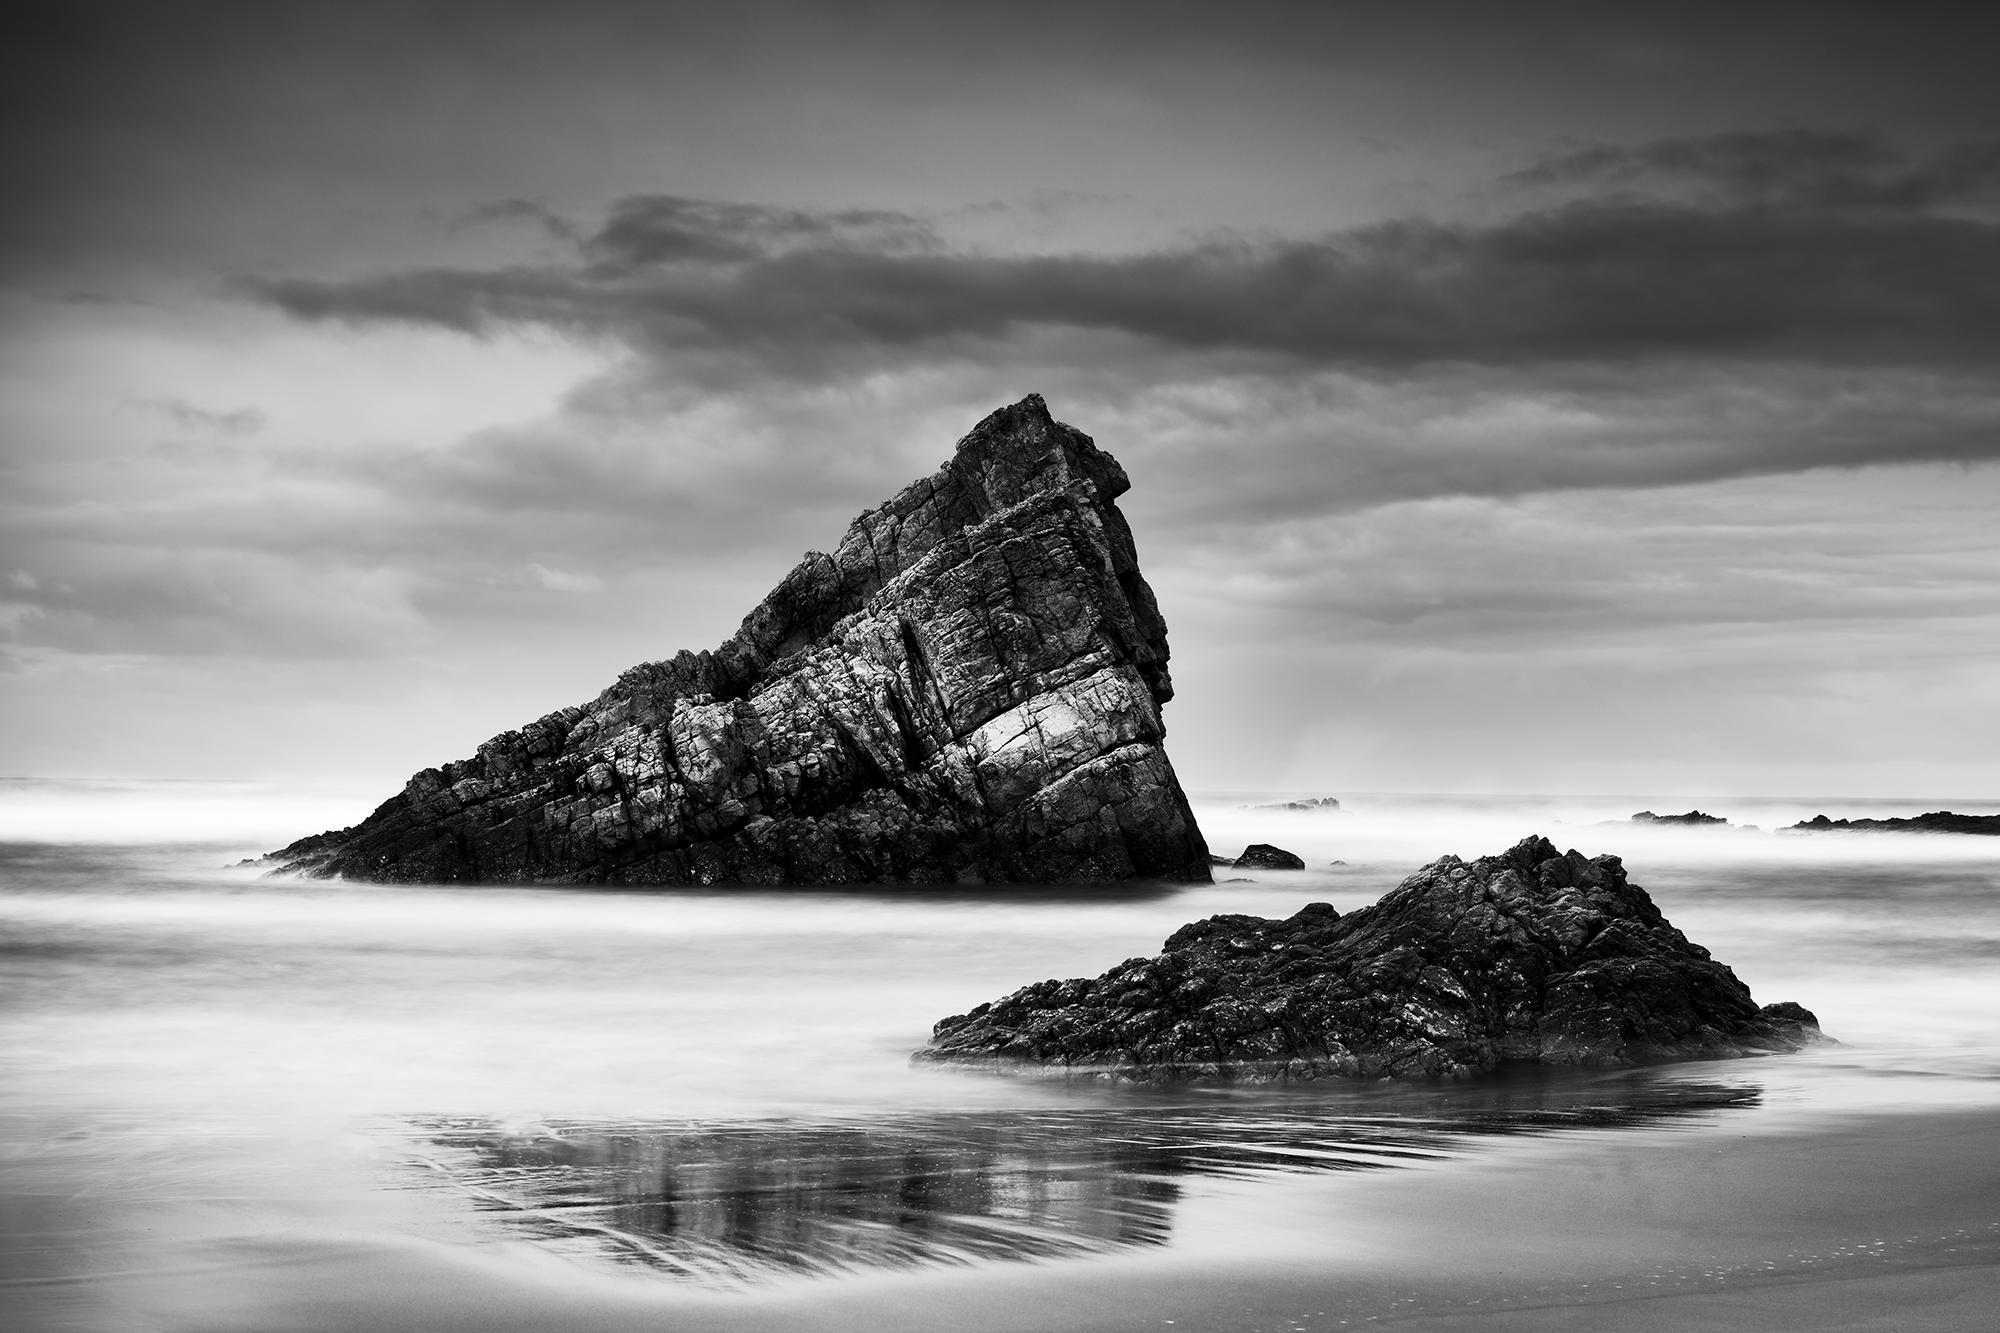 Gerald Berghammer Landscape Photograph - Bay of Biscay, shoreline, beach, Spain, black and white landscape photography